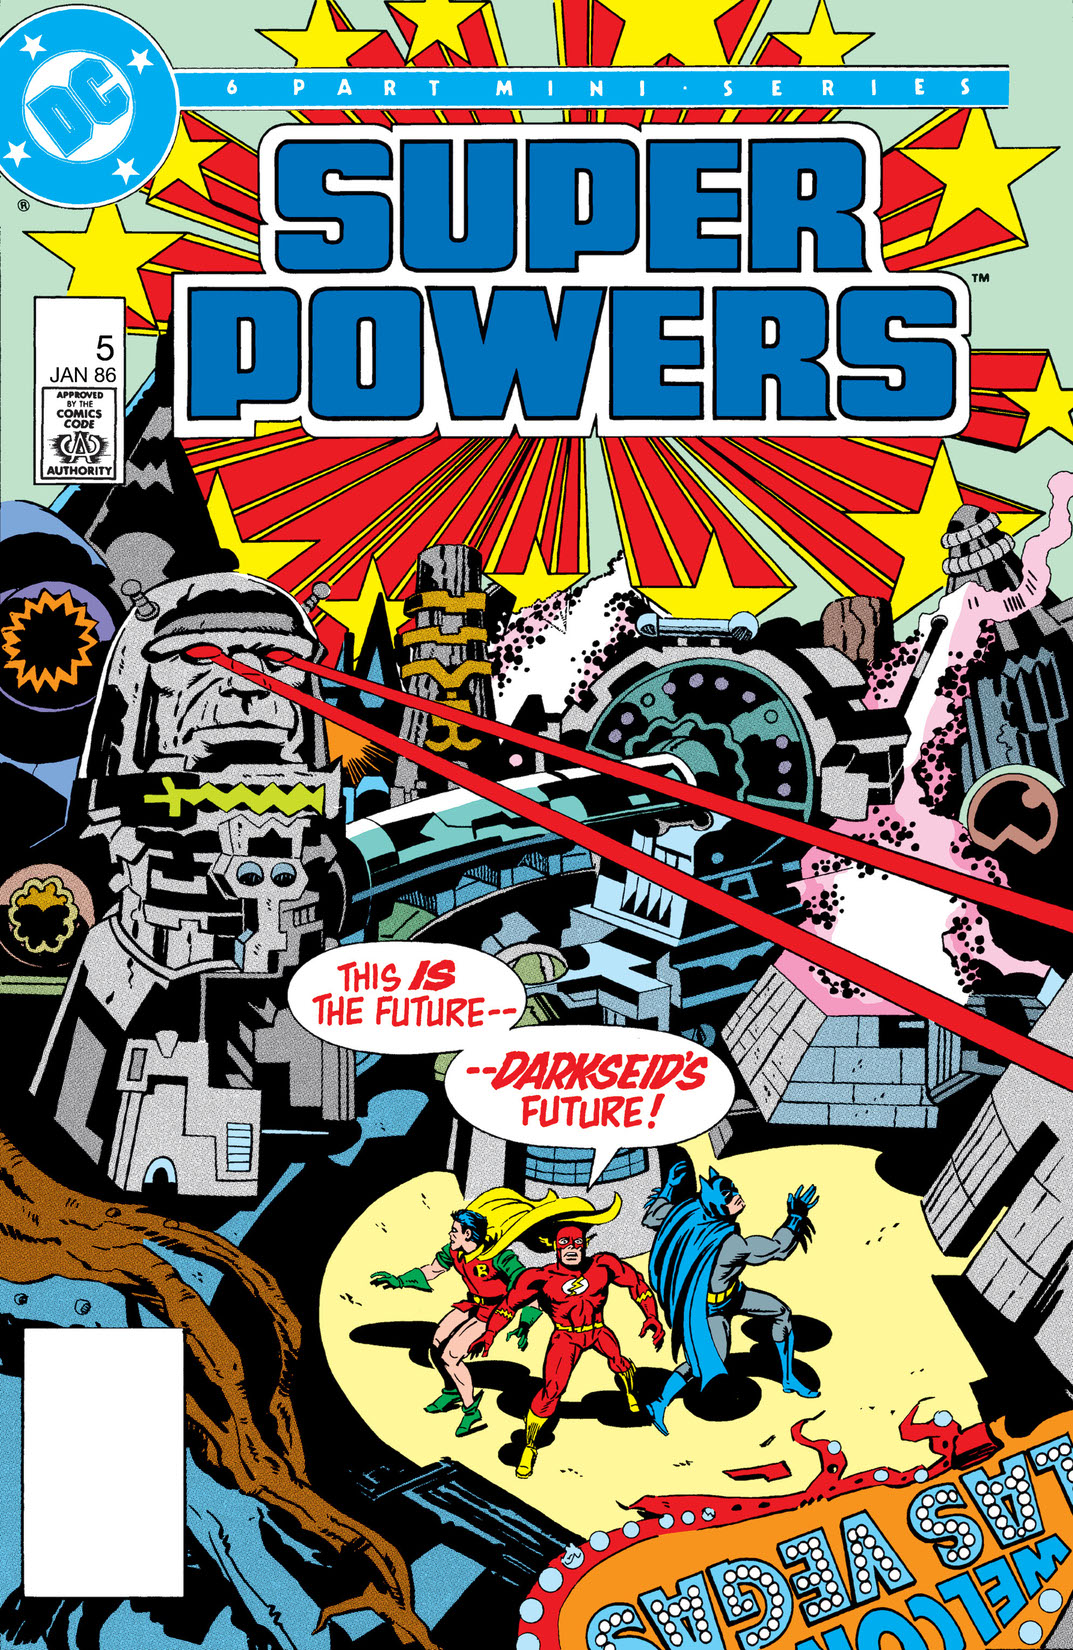 Super Powers (1985-) #5 preview images